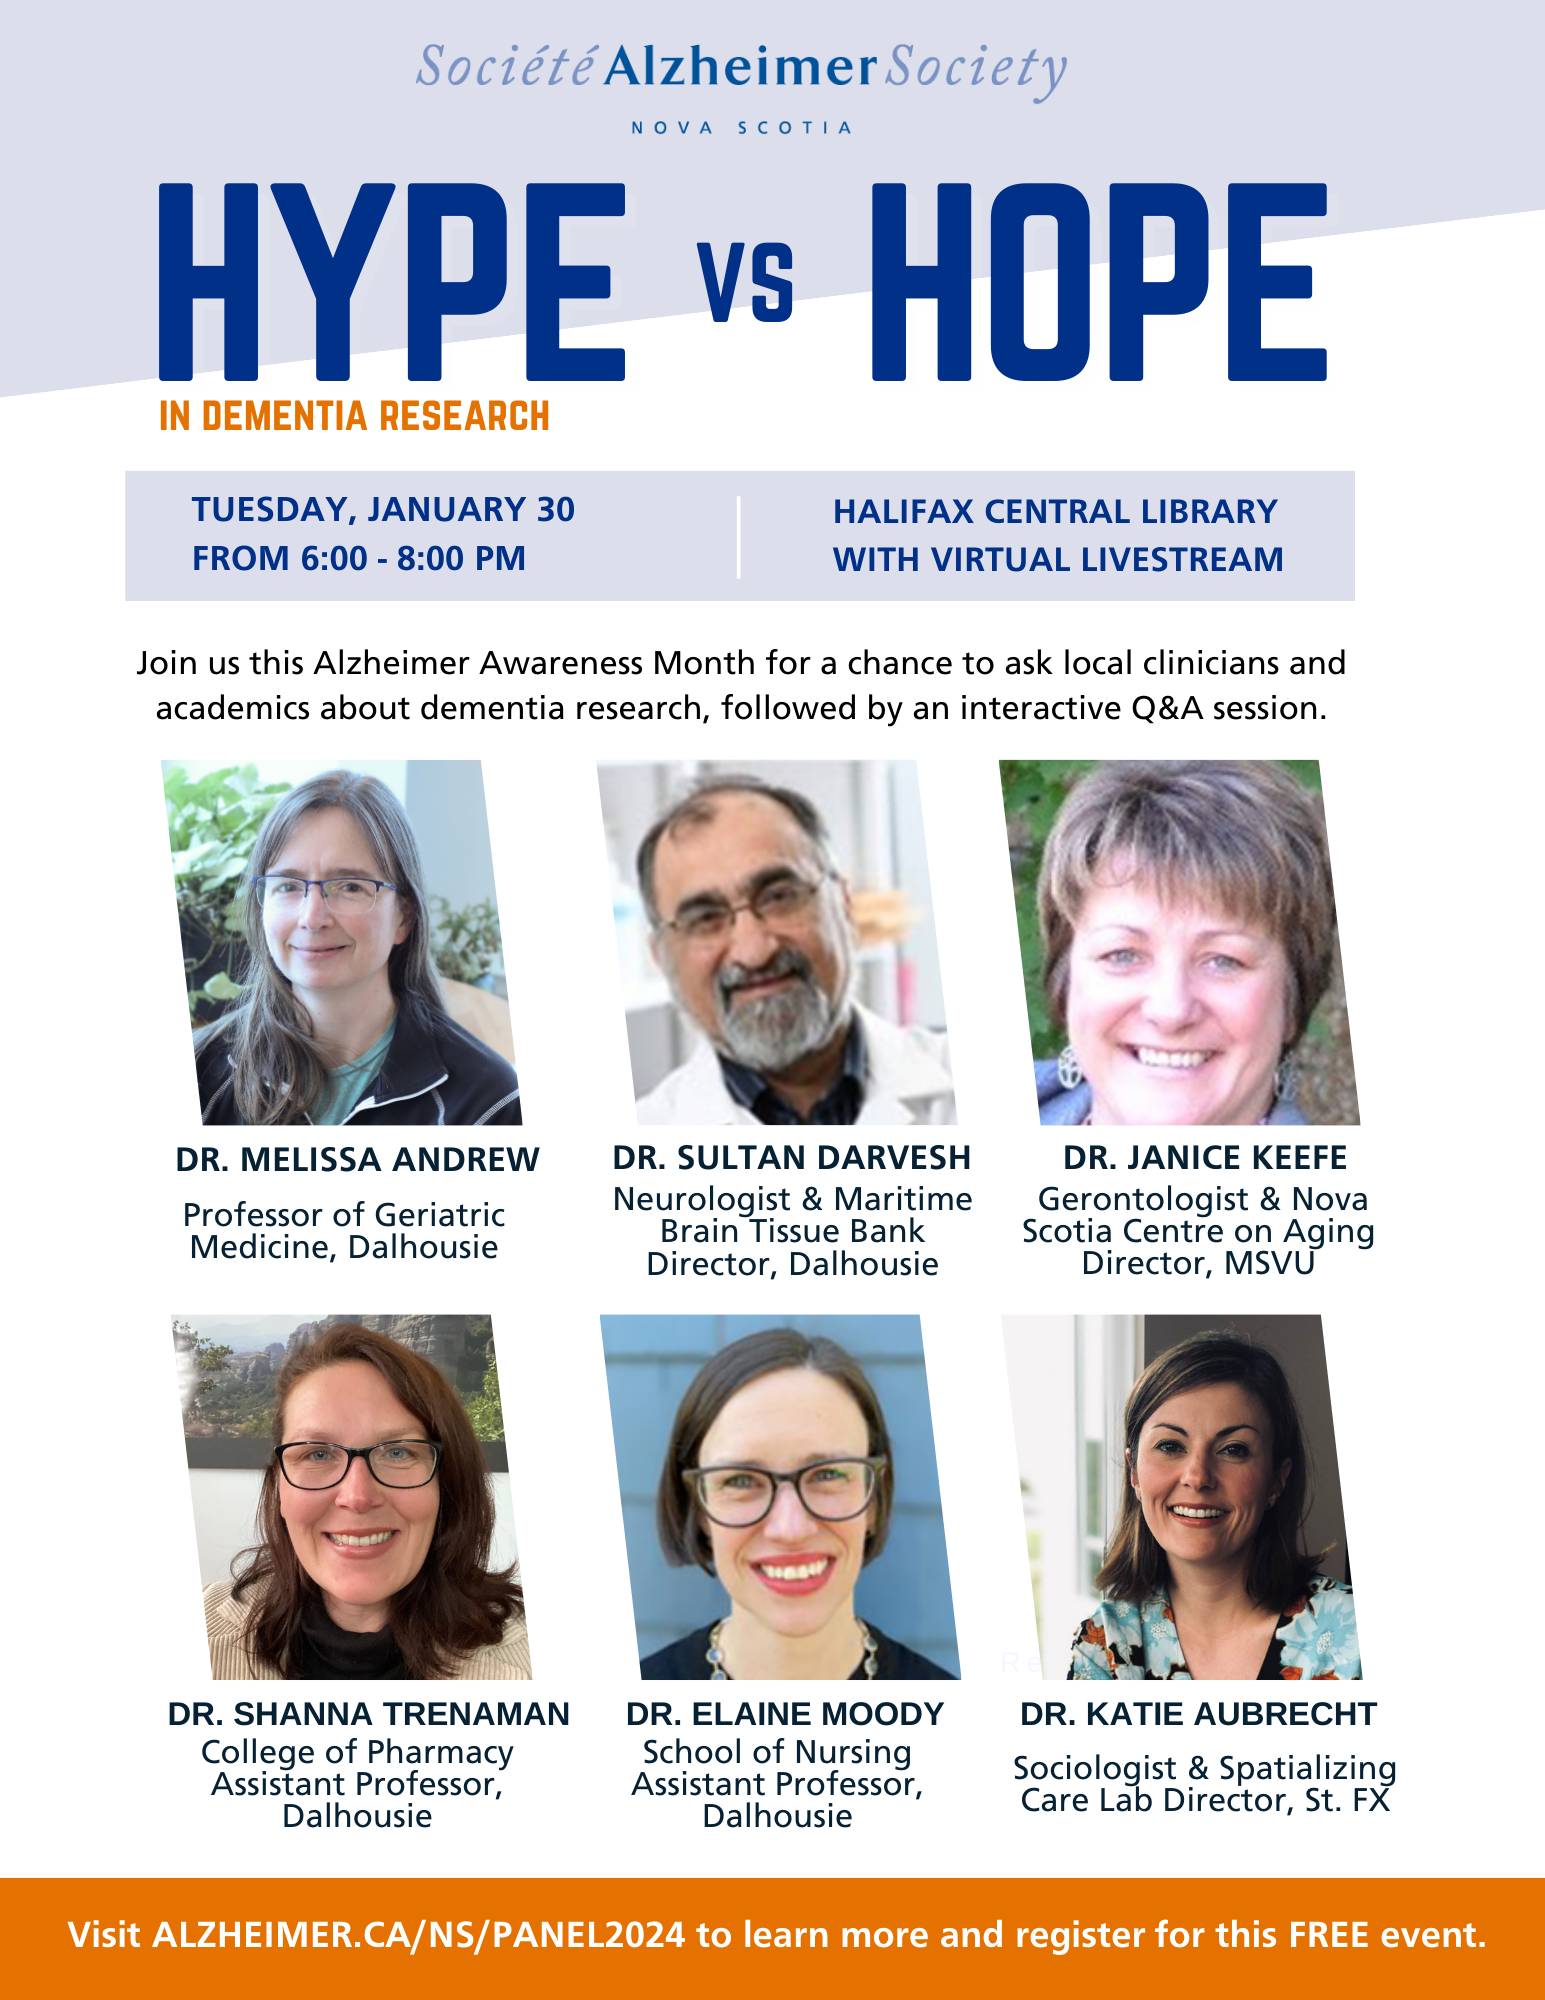 Poster reads, "HYPE VS HOPE in dementia research" in bold blue and orange letters. 6 photos of the even speakers are displayed.